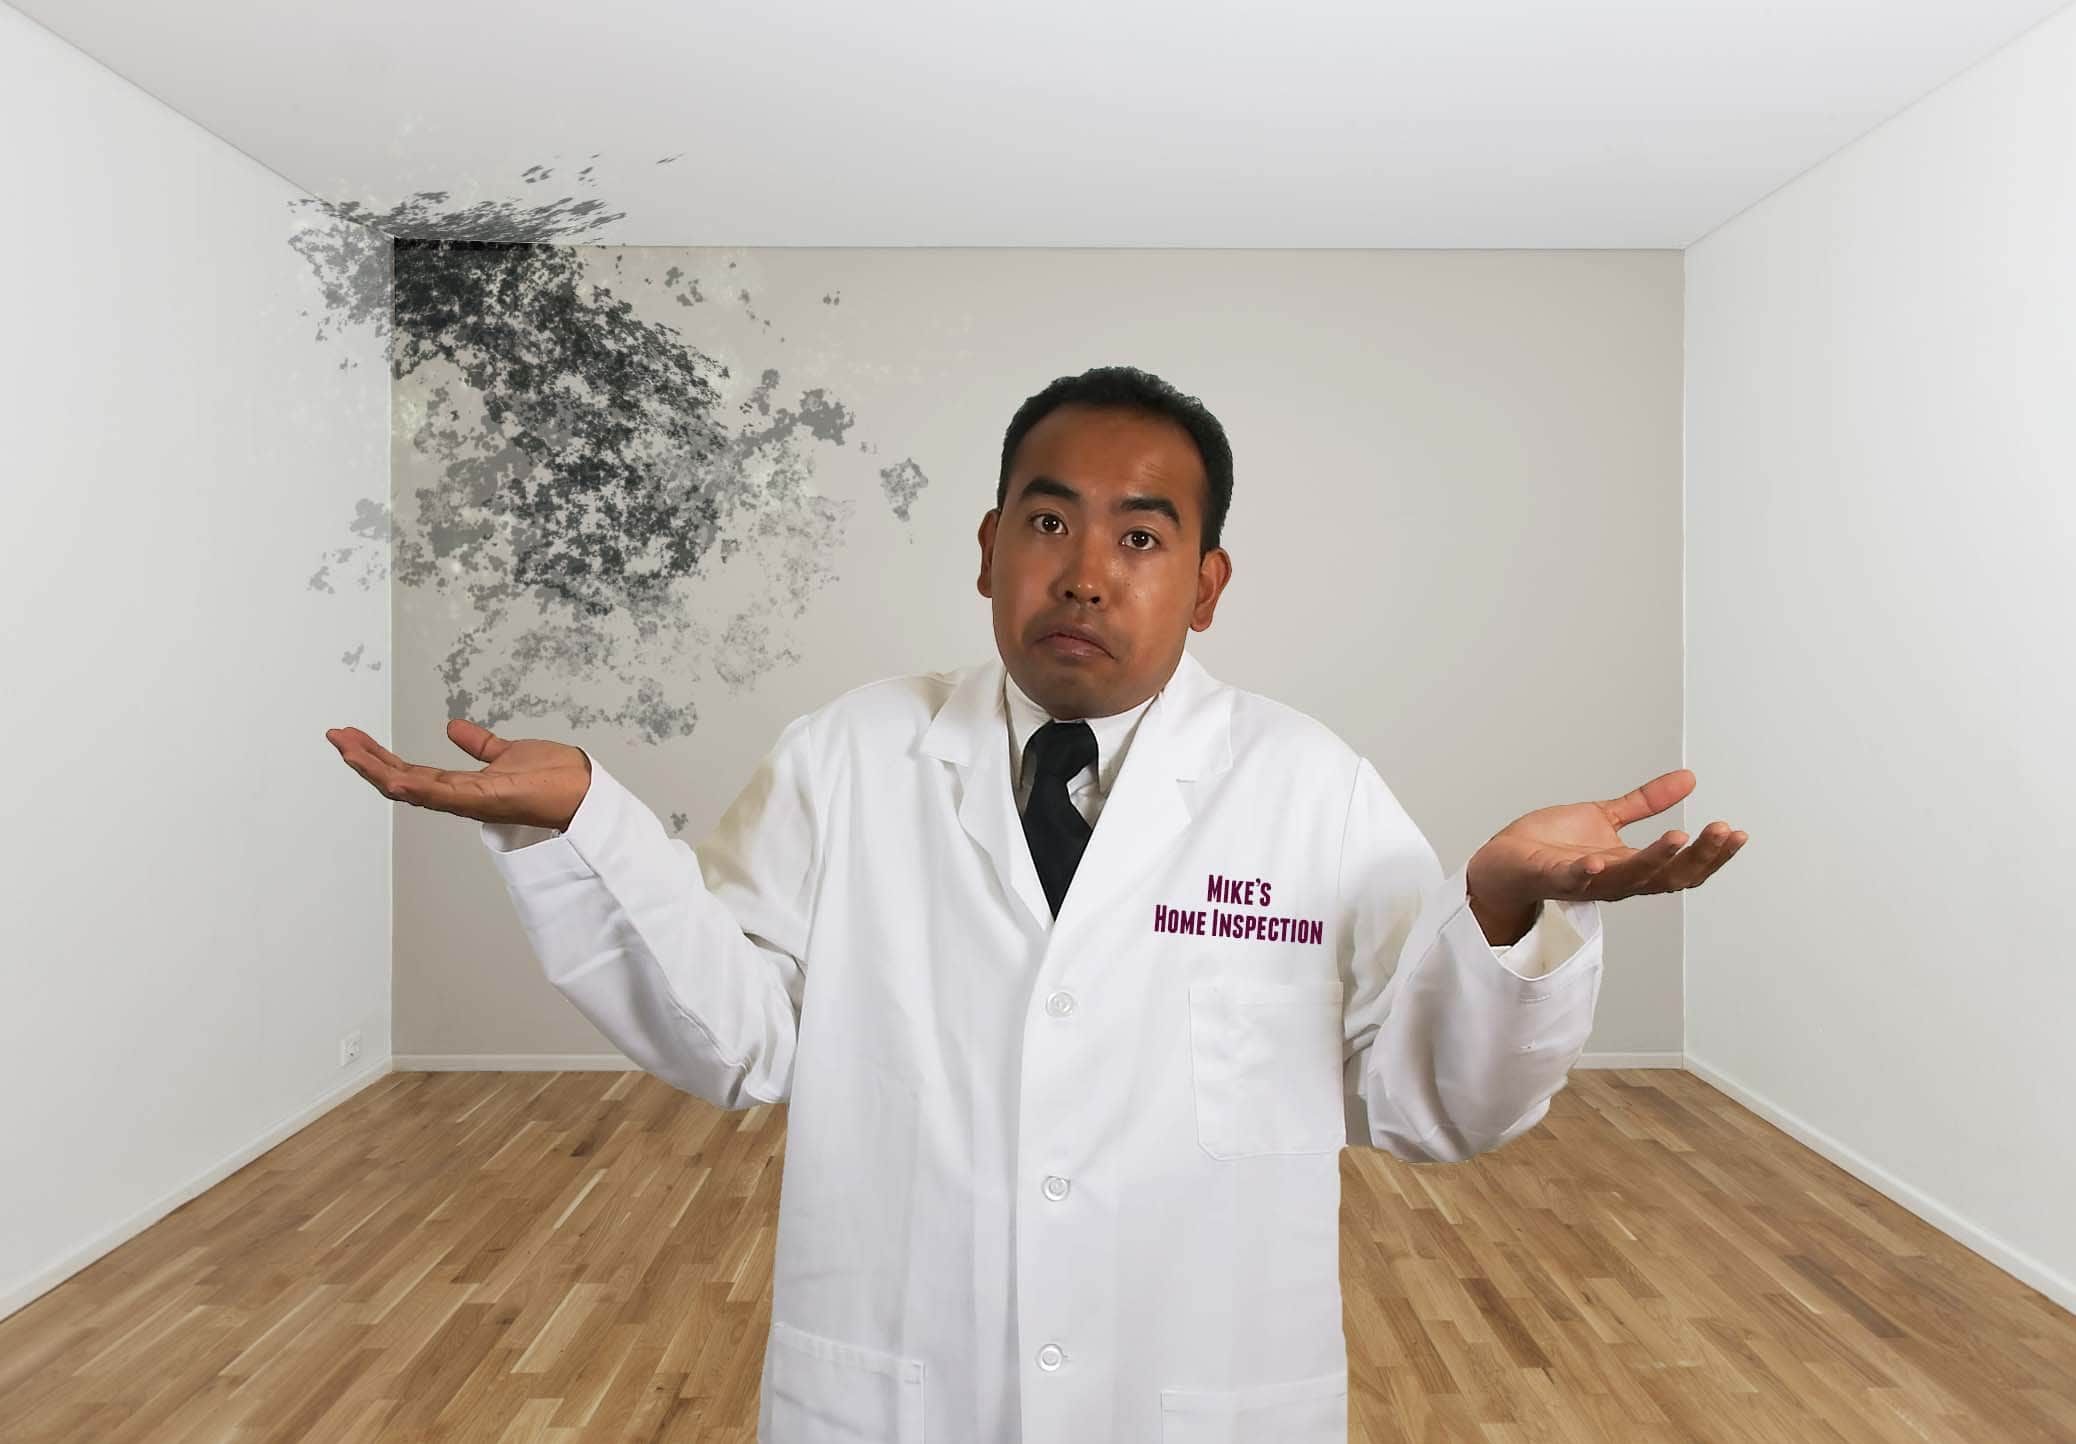 Mold expertise is not abundant with home inspectors